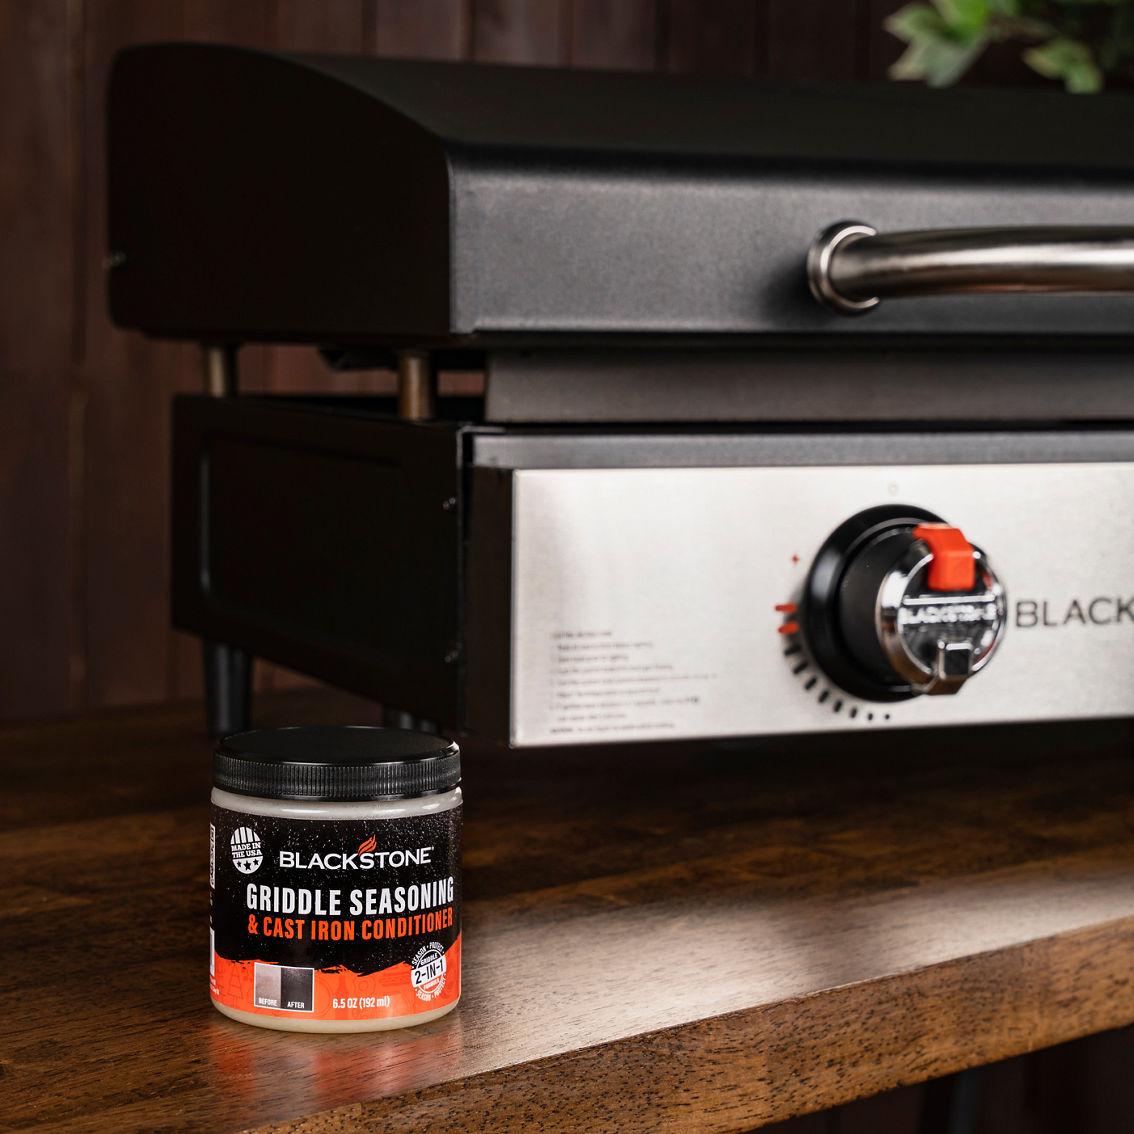 Blackstone Griddle Seasoning and Conditioner - Image 7 of 7